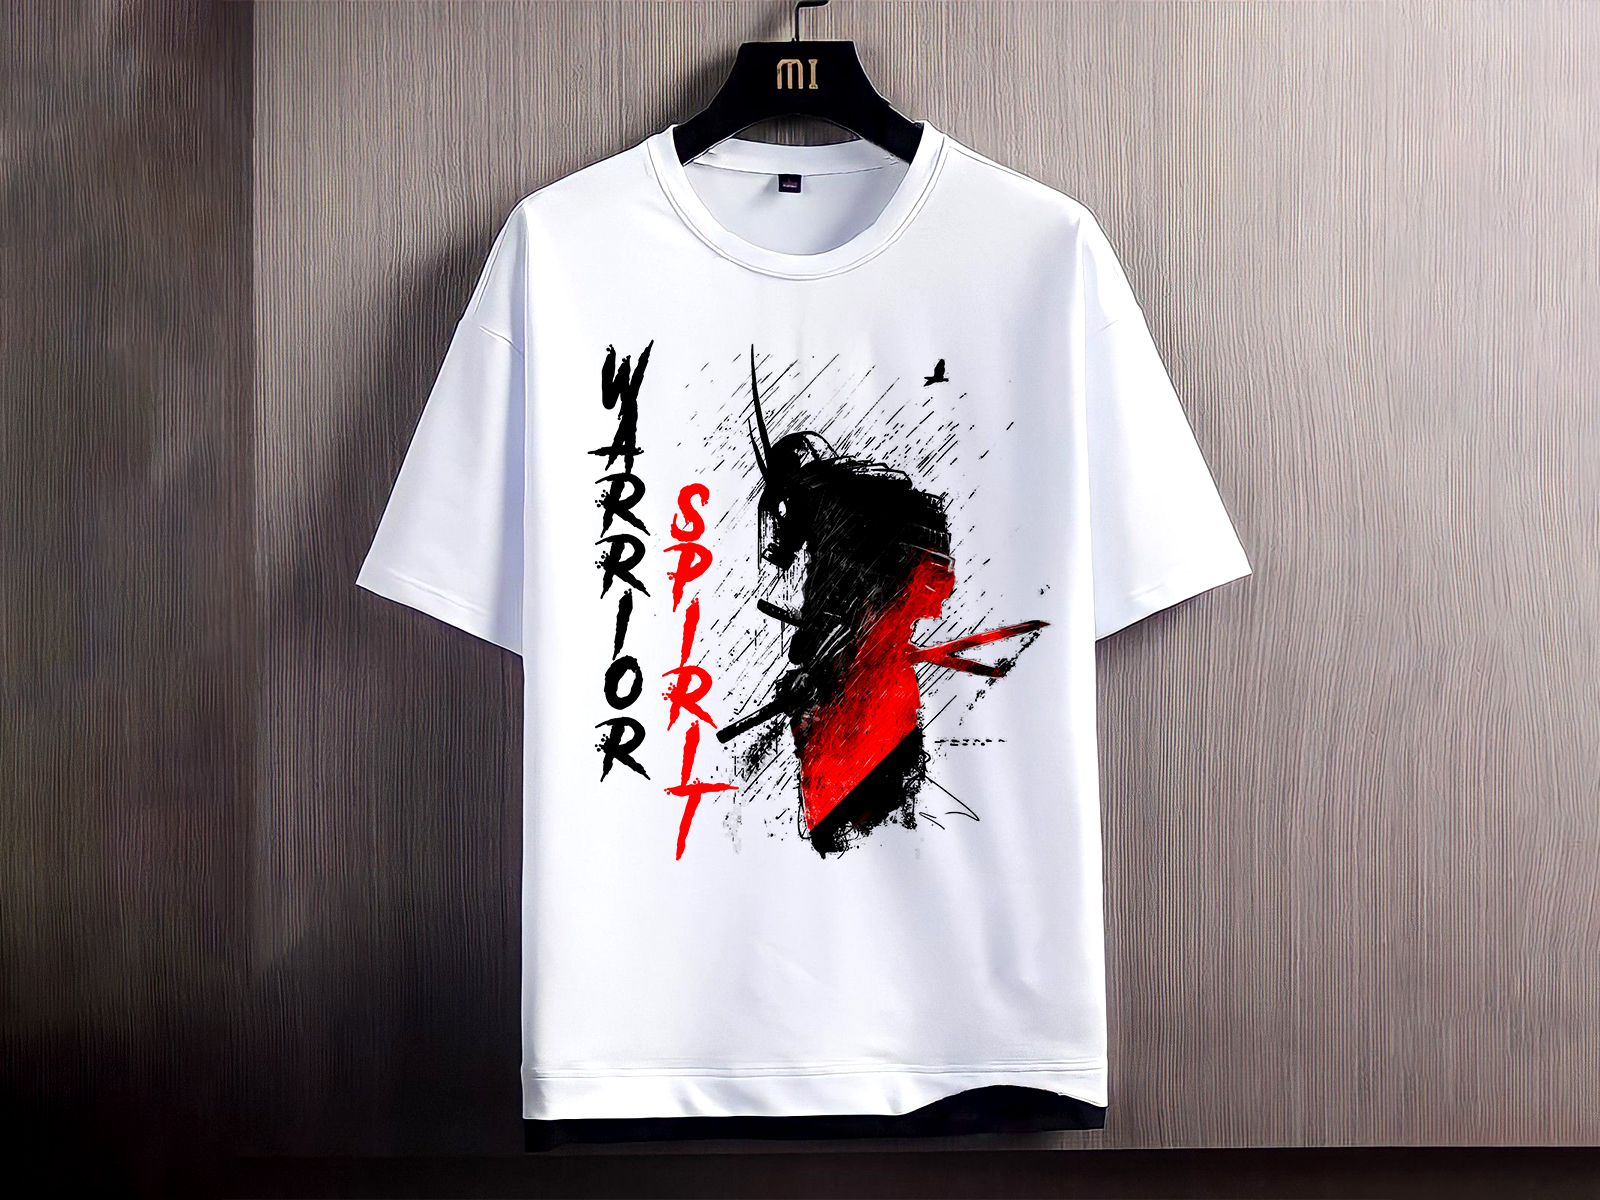 Anime TShirt Design With Canva the FREE TShirt Design Website  Masking in  Canva Tutorial  YouTube